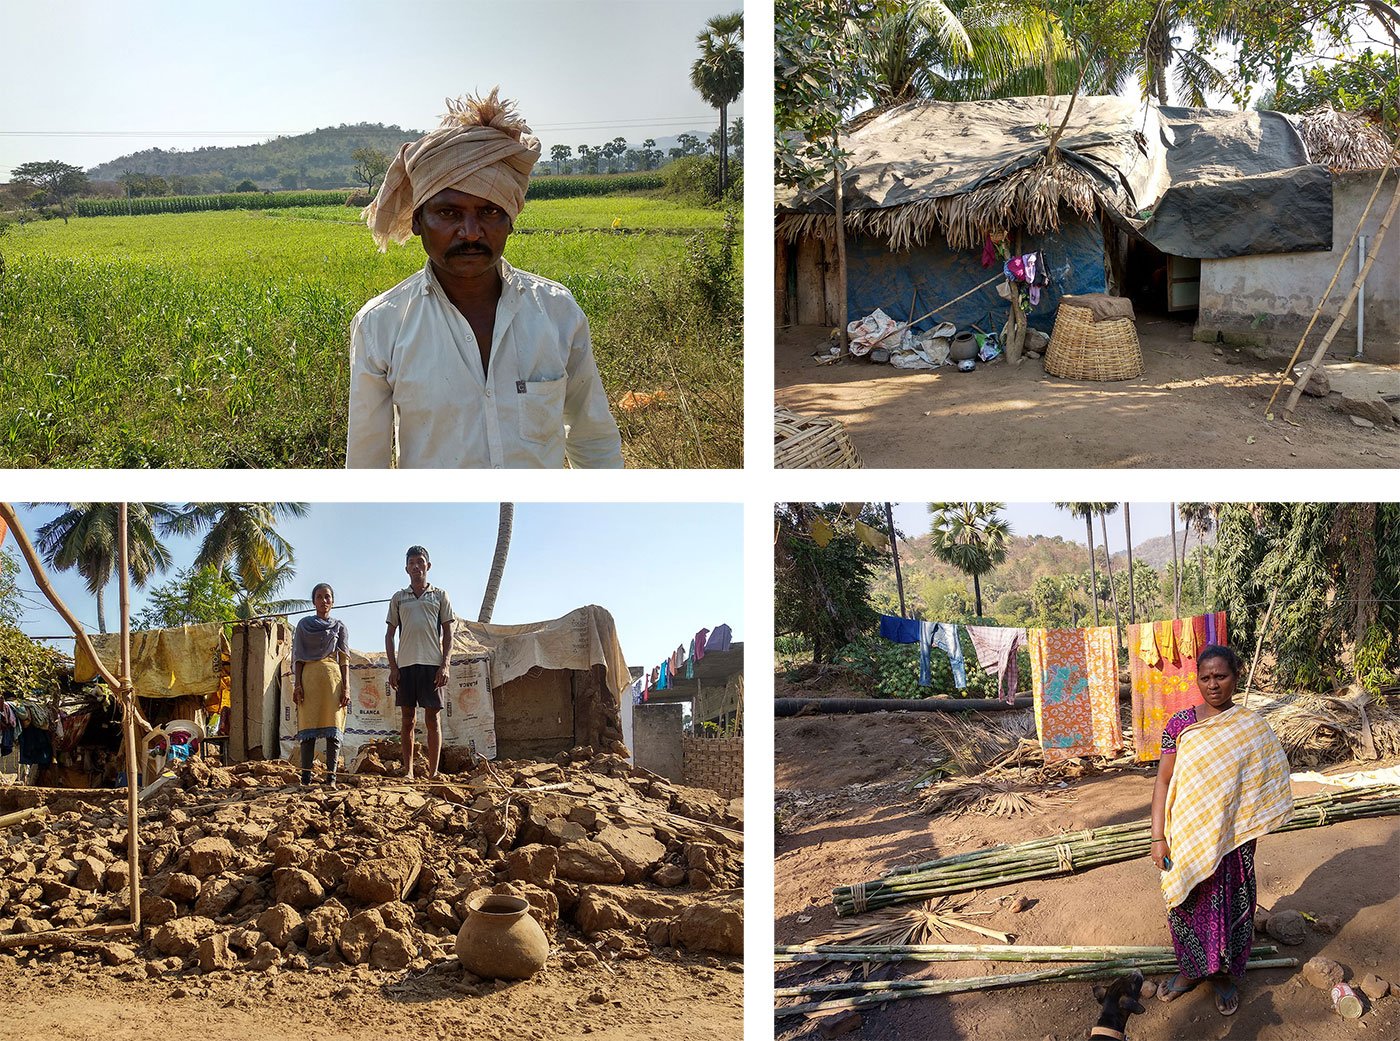 Tama Balaraju in front of his field which got whitewashed in October floods. He again started cultivating maize after the floods receded (top left). 
Balaraju is living in this hut right now which he constructed after spending more than 45 days of cold winter nights right under the sky (top right). Mutyala Rao and his sister Prasanna Anjali stand on the top of the ruins of their house which got collapsed during the floods (bottom left). 
Madakam Lakshmi in front of her demolished house. She is trying to build a new one but couldn’t manage to set aside money for the same. So, she is living on the top of the terrace of the adjacent building (bottom right)